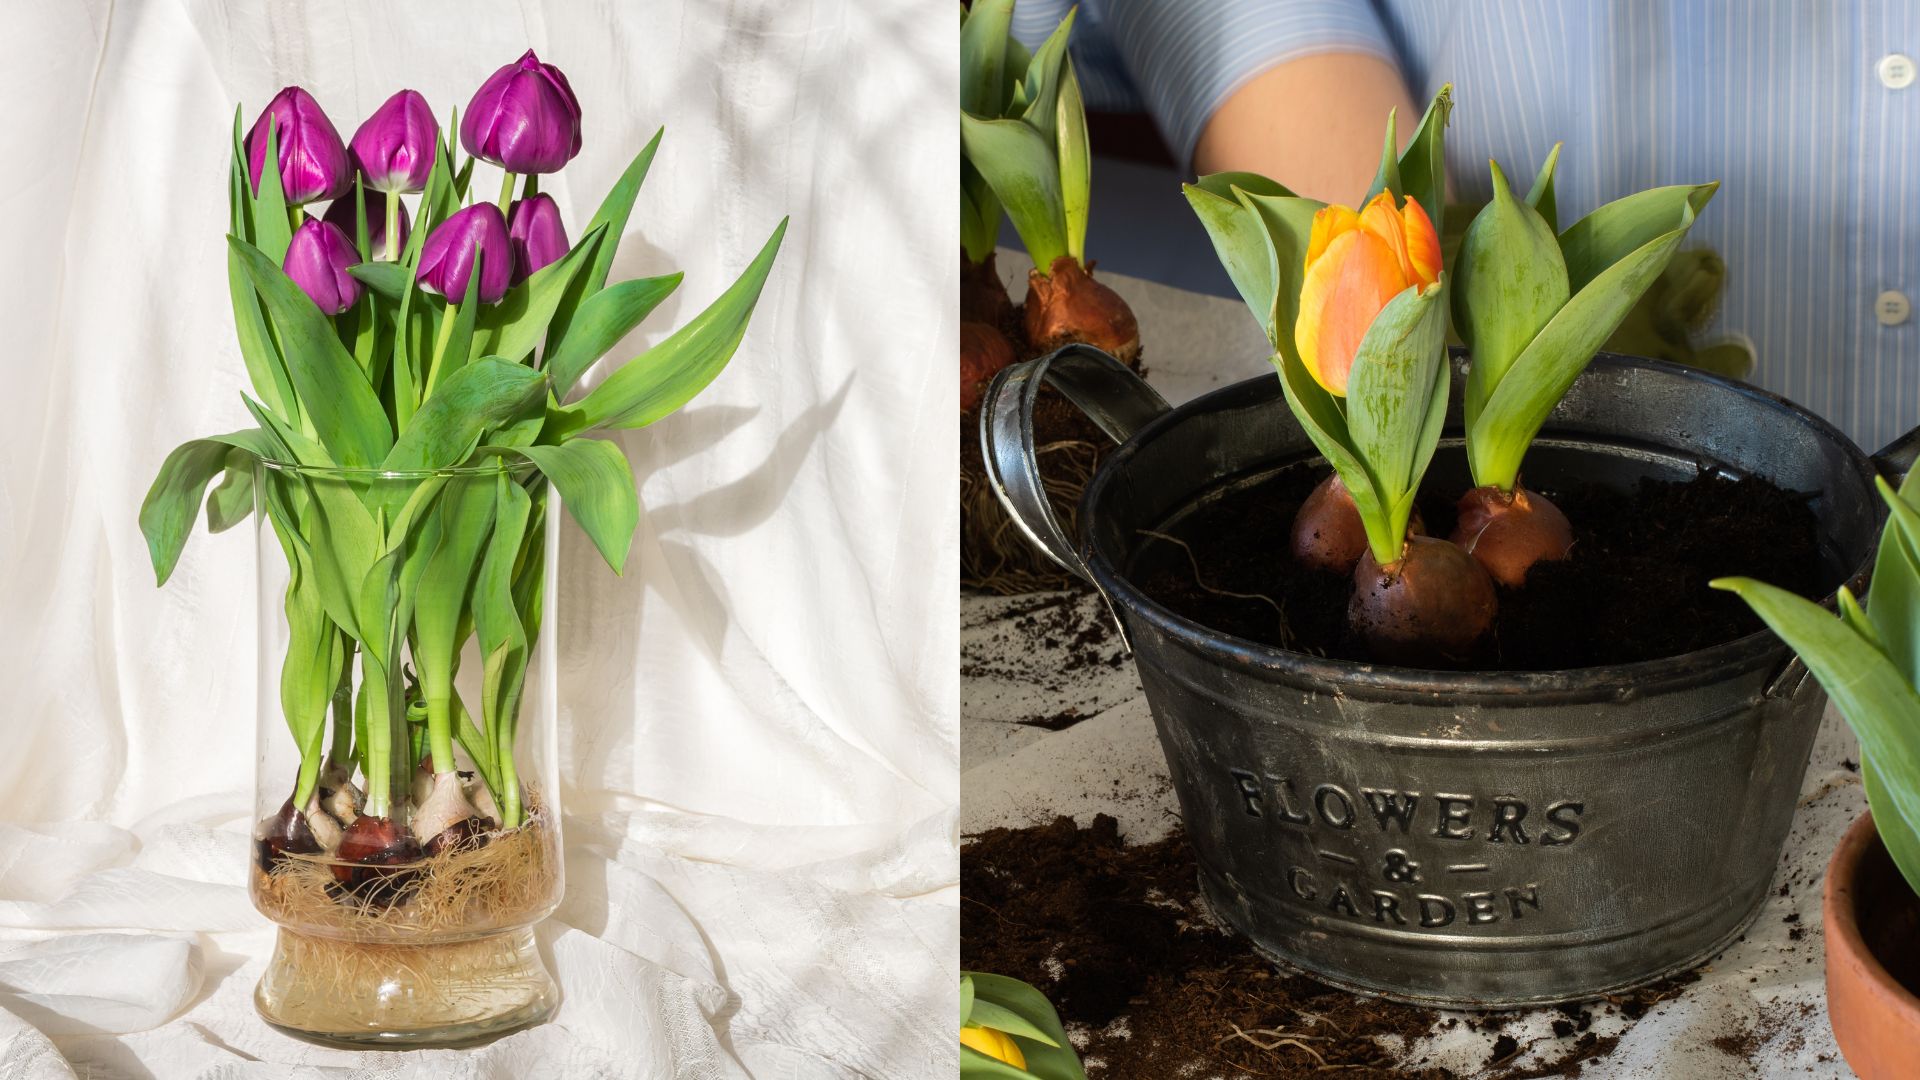 Follow These 9 Simple Steps To Grow Tulips In Water And Have A Wonderful Flower Display